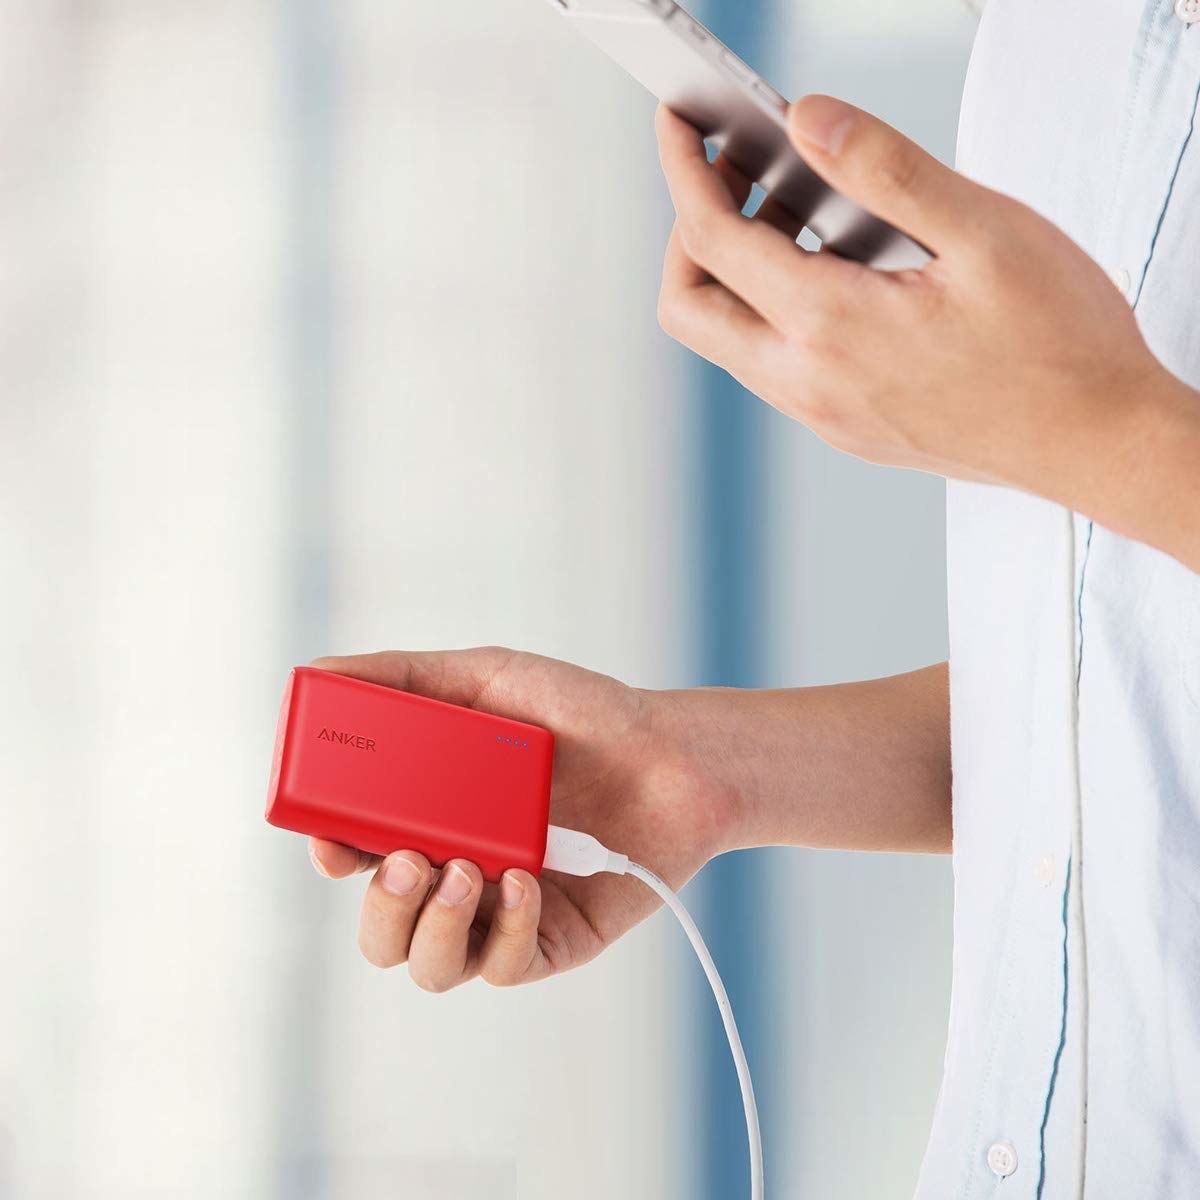 Model holds the small portable charger in their hand while holding their phone in the other hand